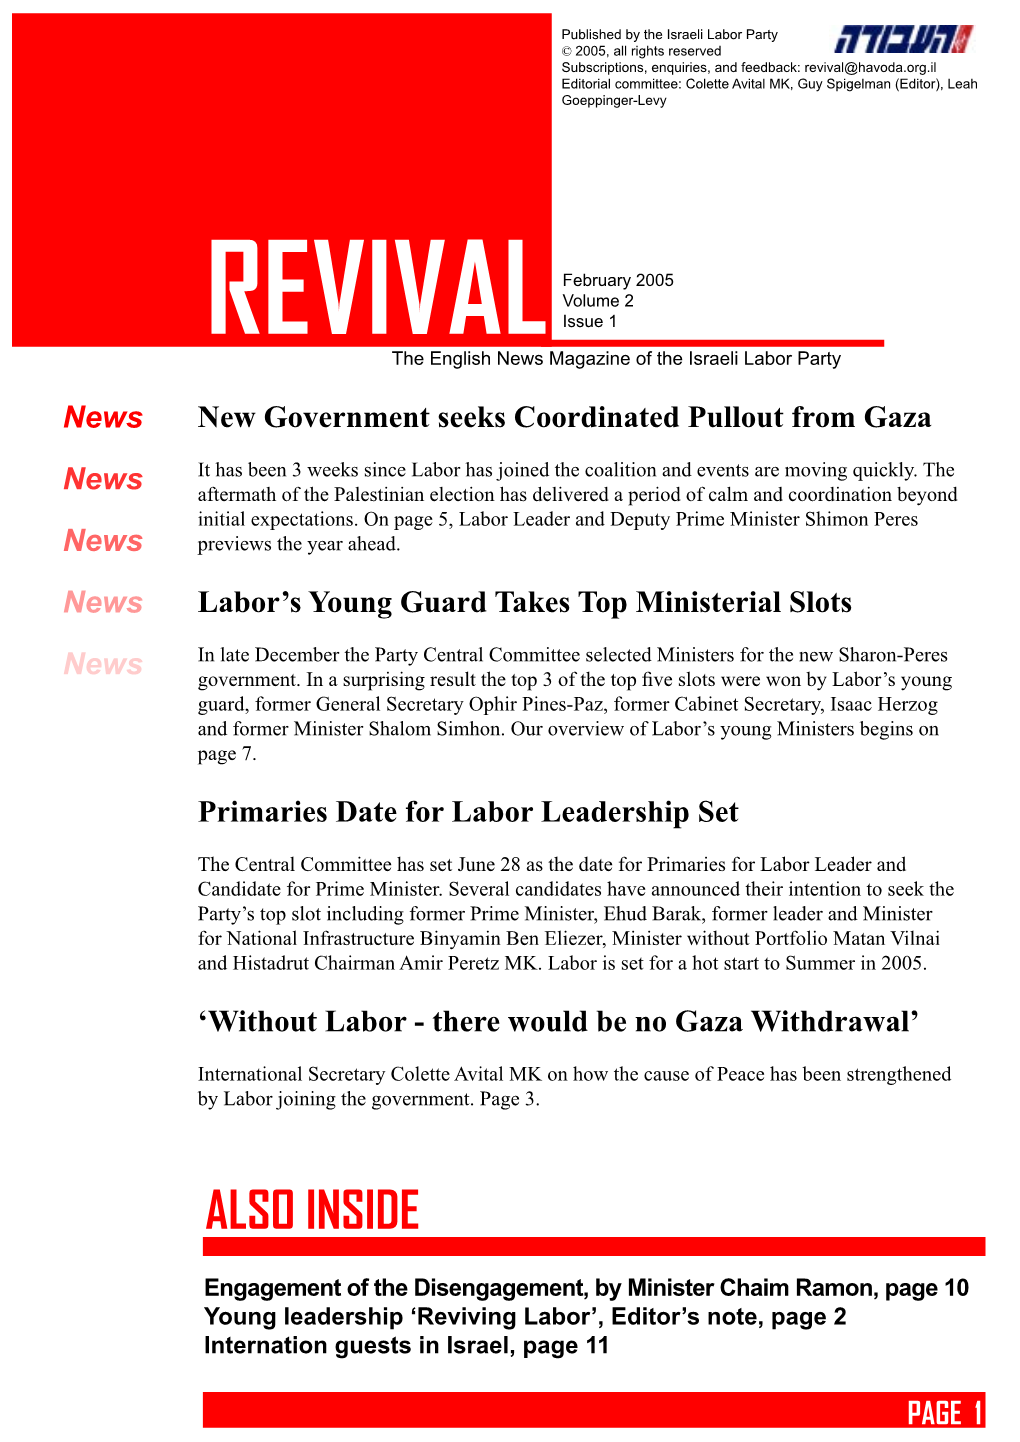 Revival Vol 2 Issue 1 Feb 2005.Indd